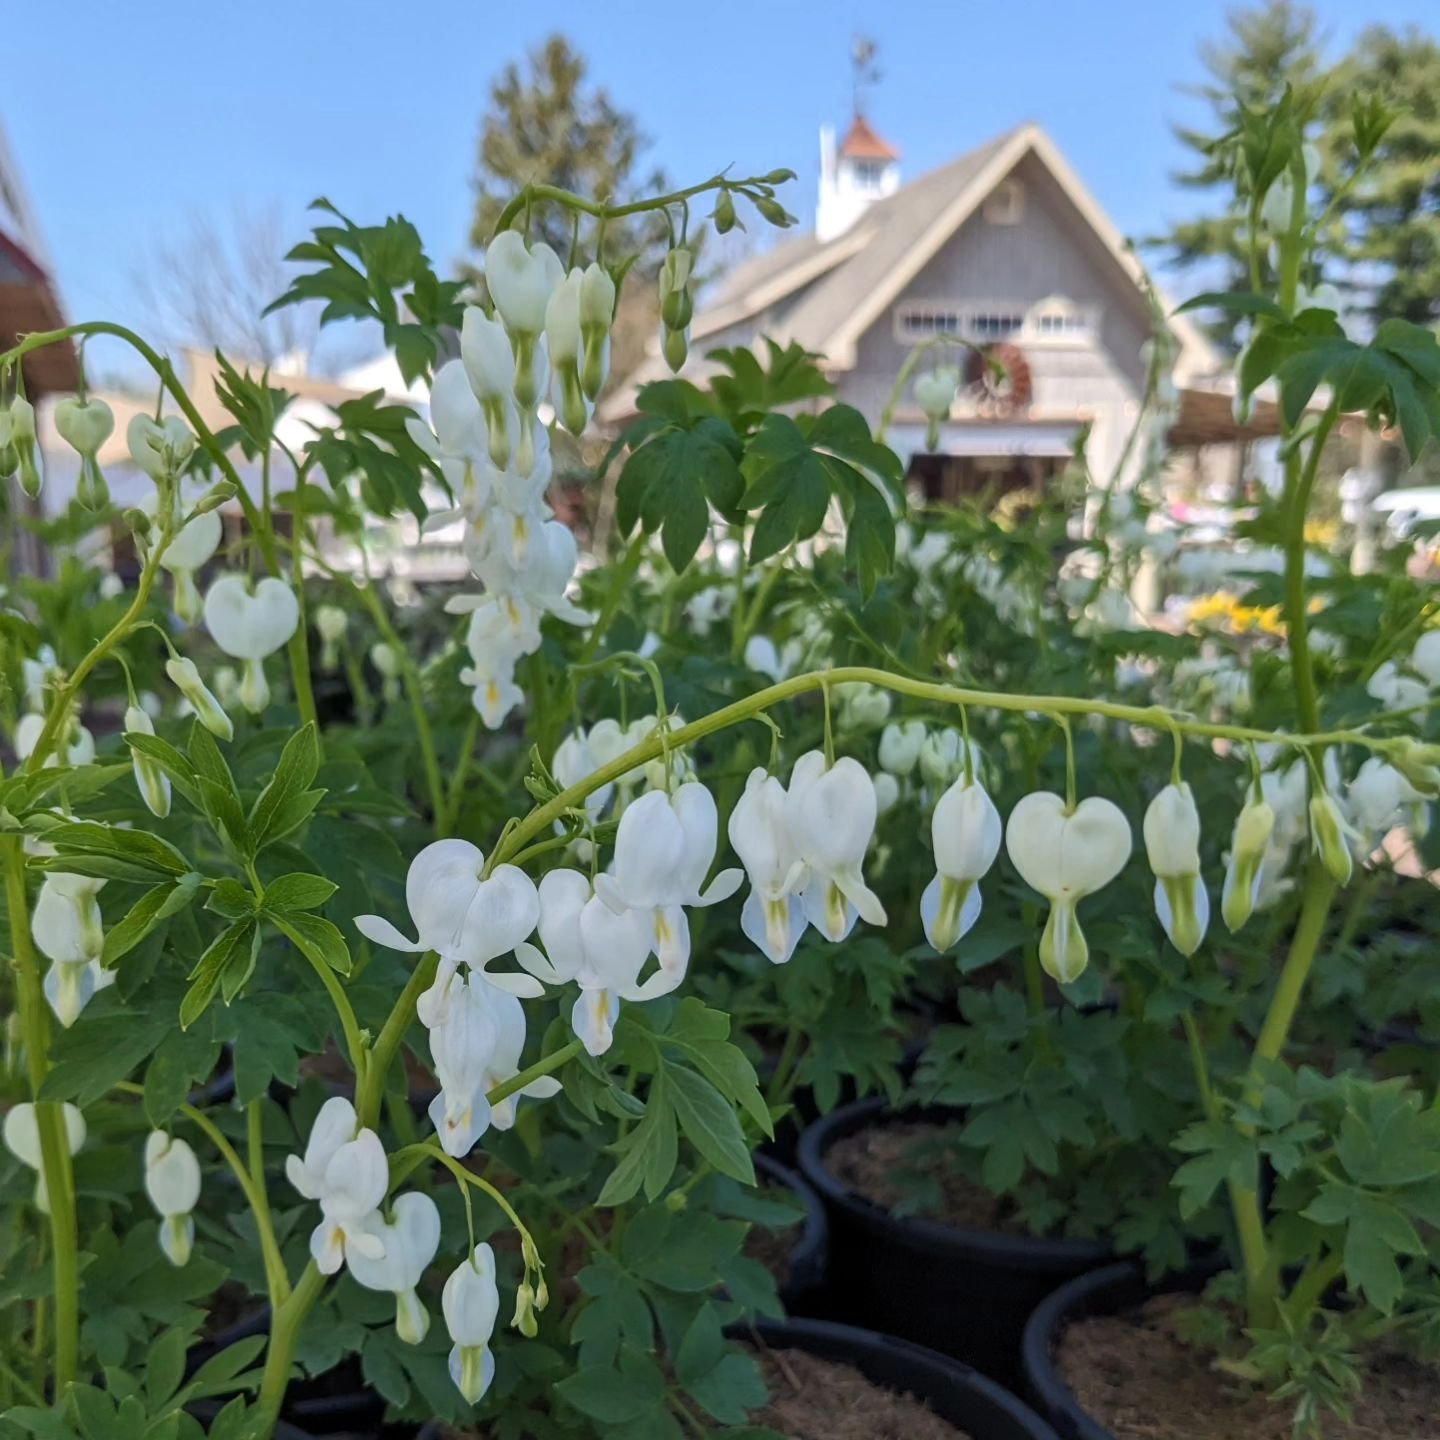 N E W 🎉 We have lots of new arrivals this week! Check out this gorgeous white bleeding heart (first picture) 🤍  and so many more beautiful plants! Fresh organic herbs, veggie plants, new perennials, annuals, shrubs and more!!!🌿